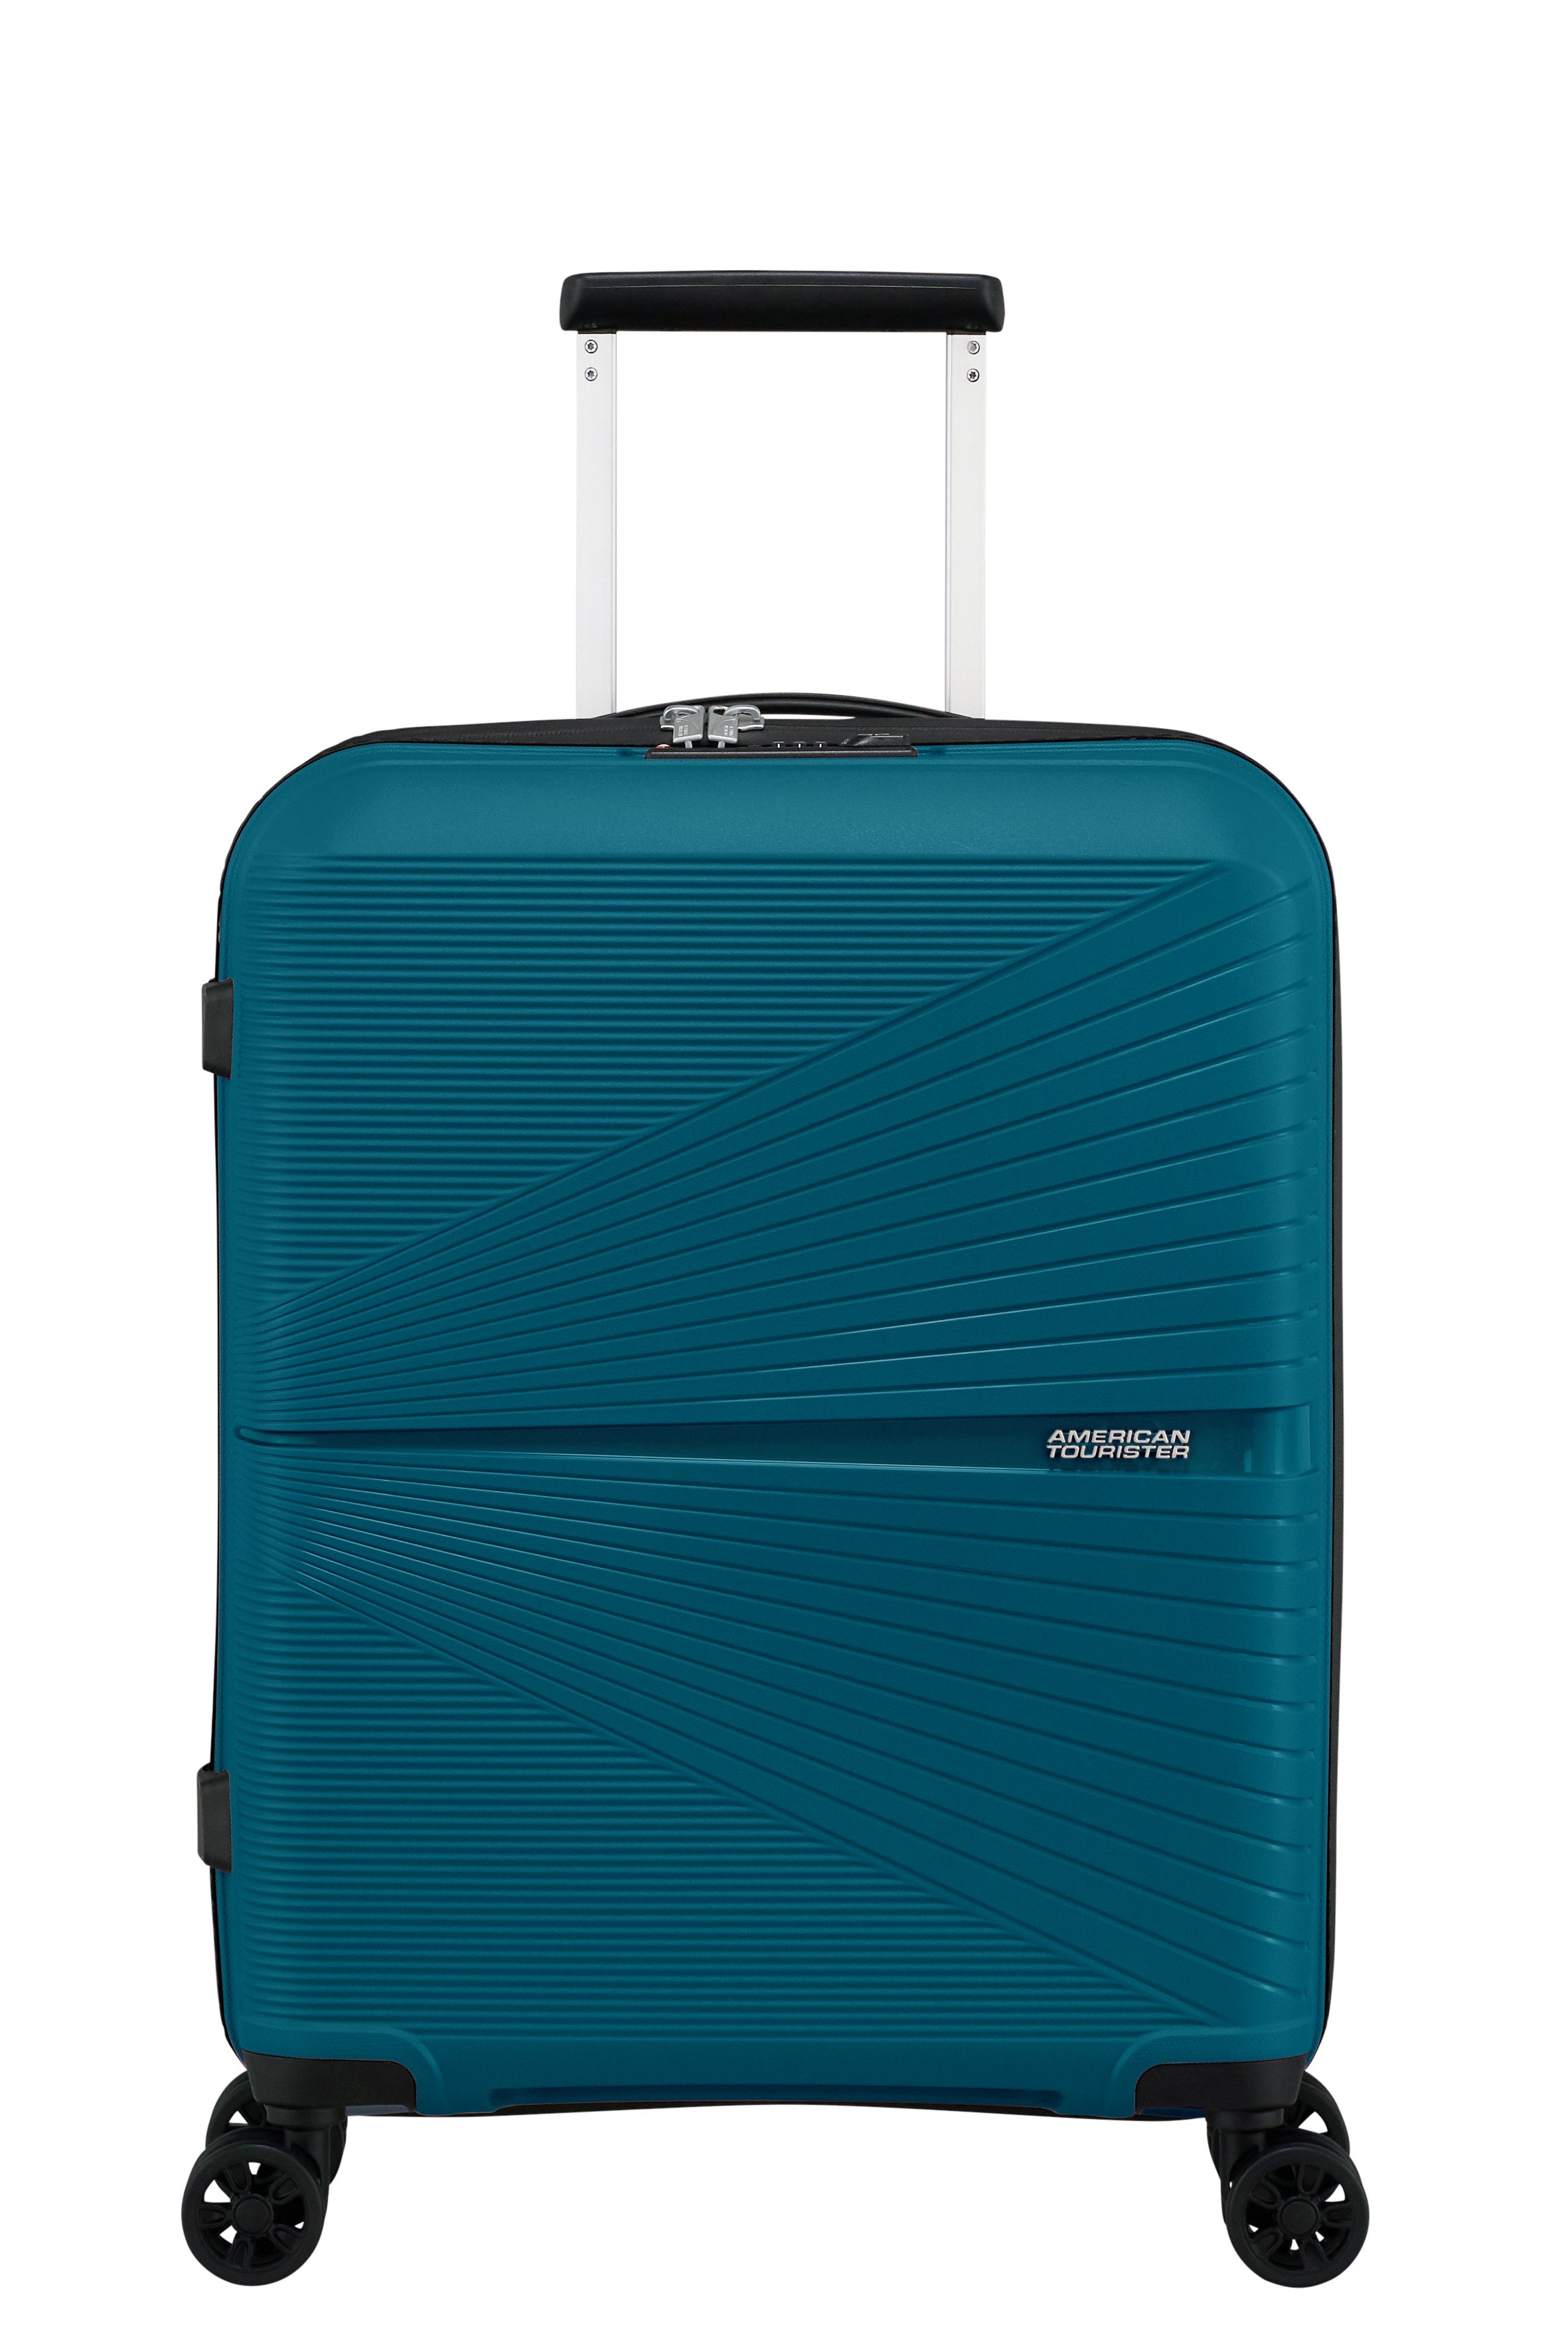 American Tourister - Airconic 55cm Small Suitcase - Deep Ocean-2